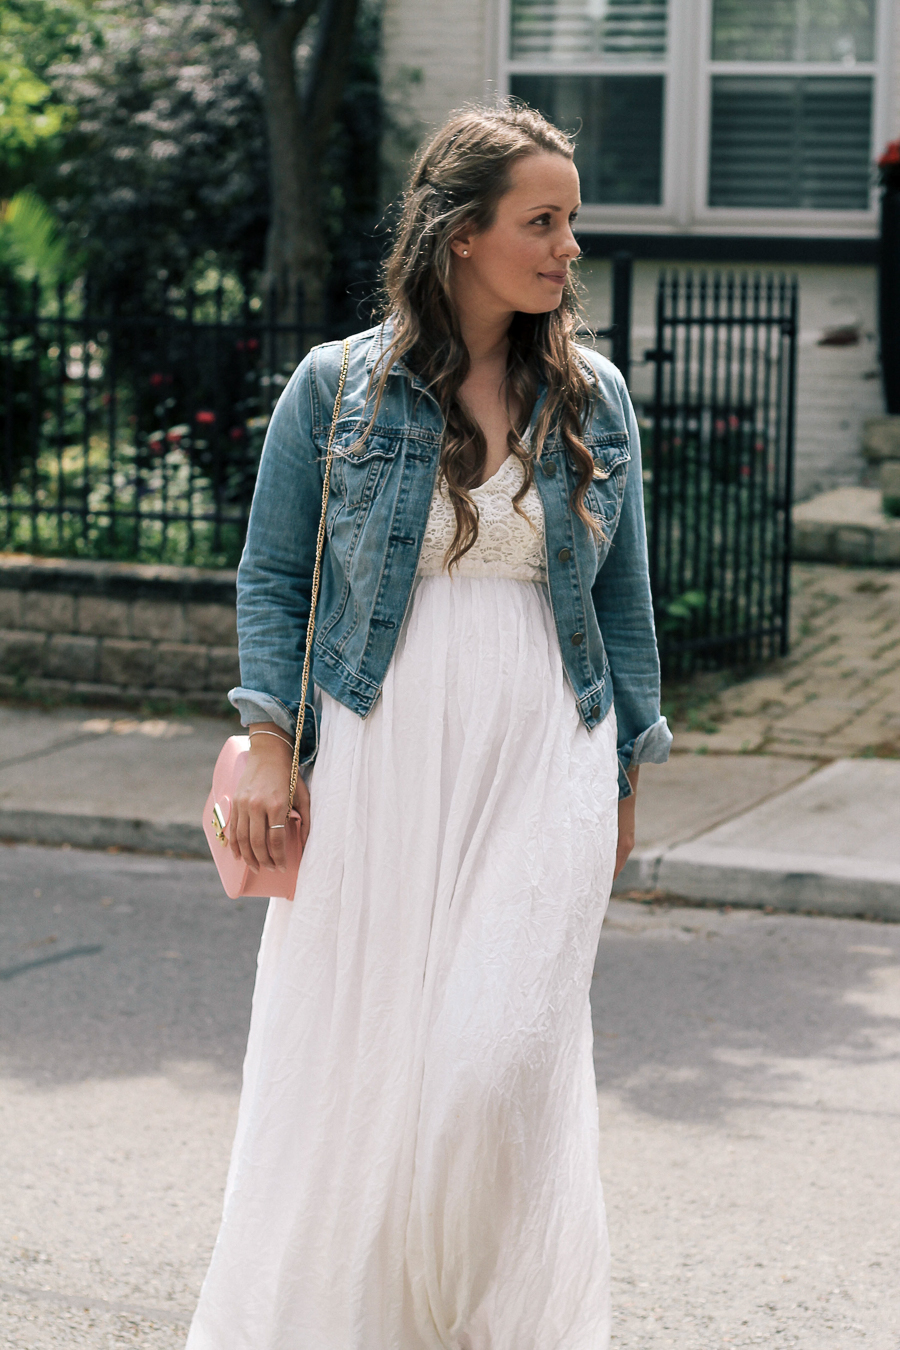 The Maxi Dress With Jean Jacket ~ What to Wear Over 40